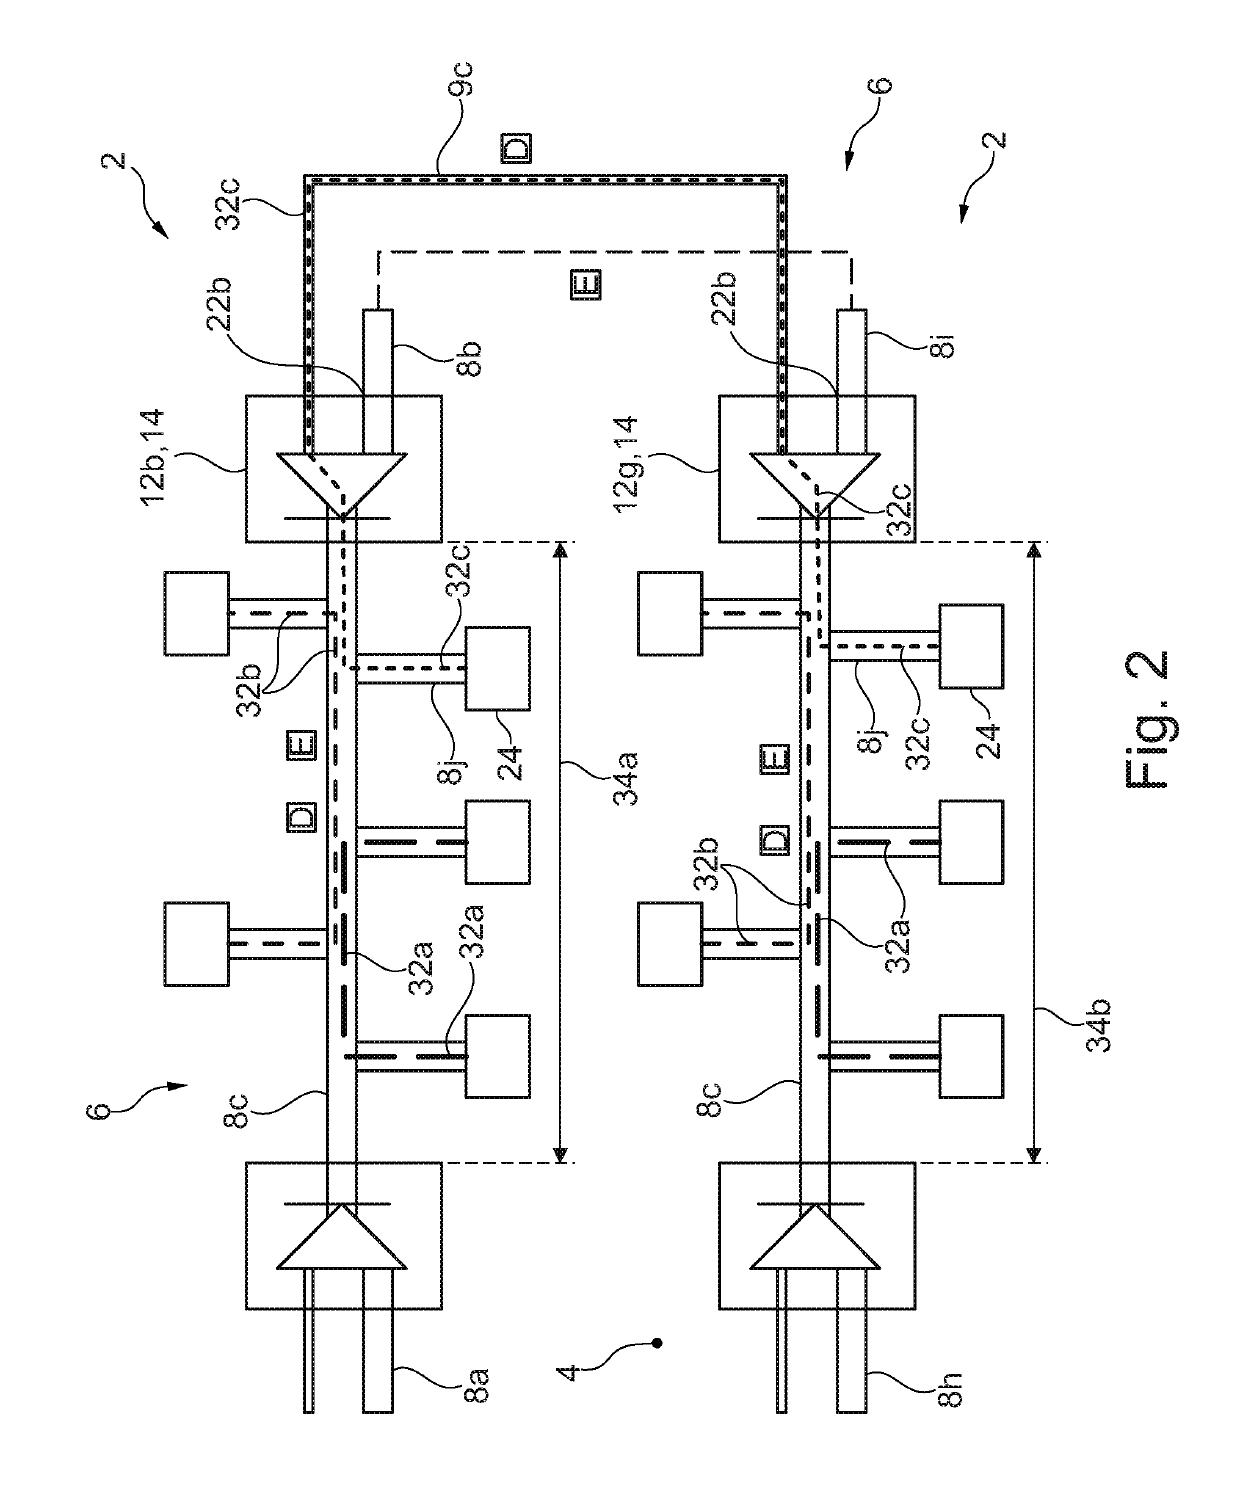 Transmission arrangement for transmitting data within an aircraft, and aircraft